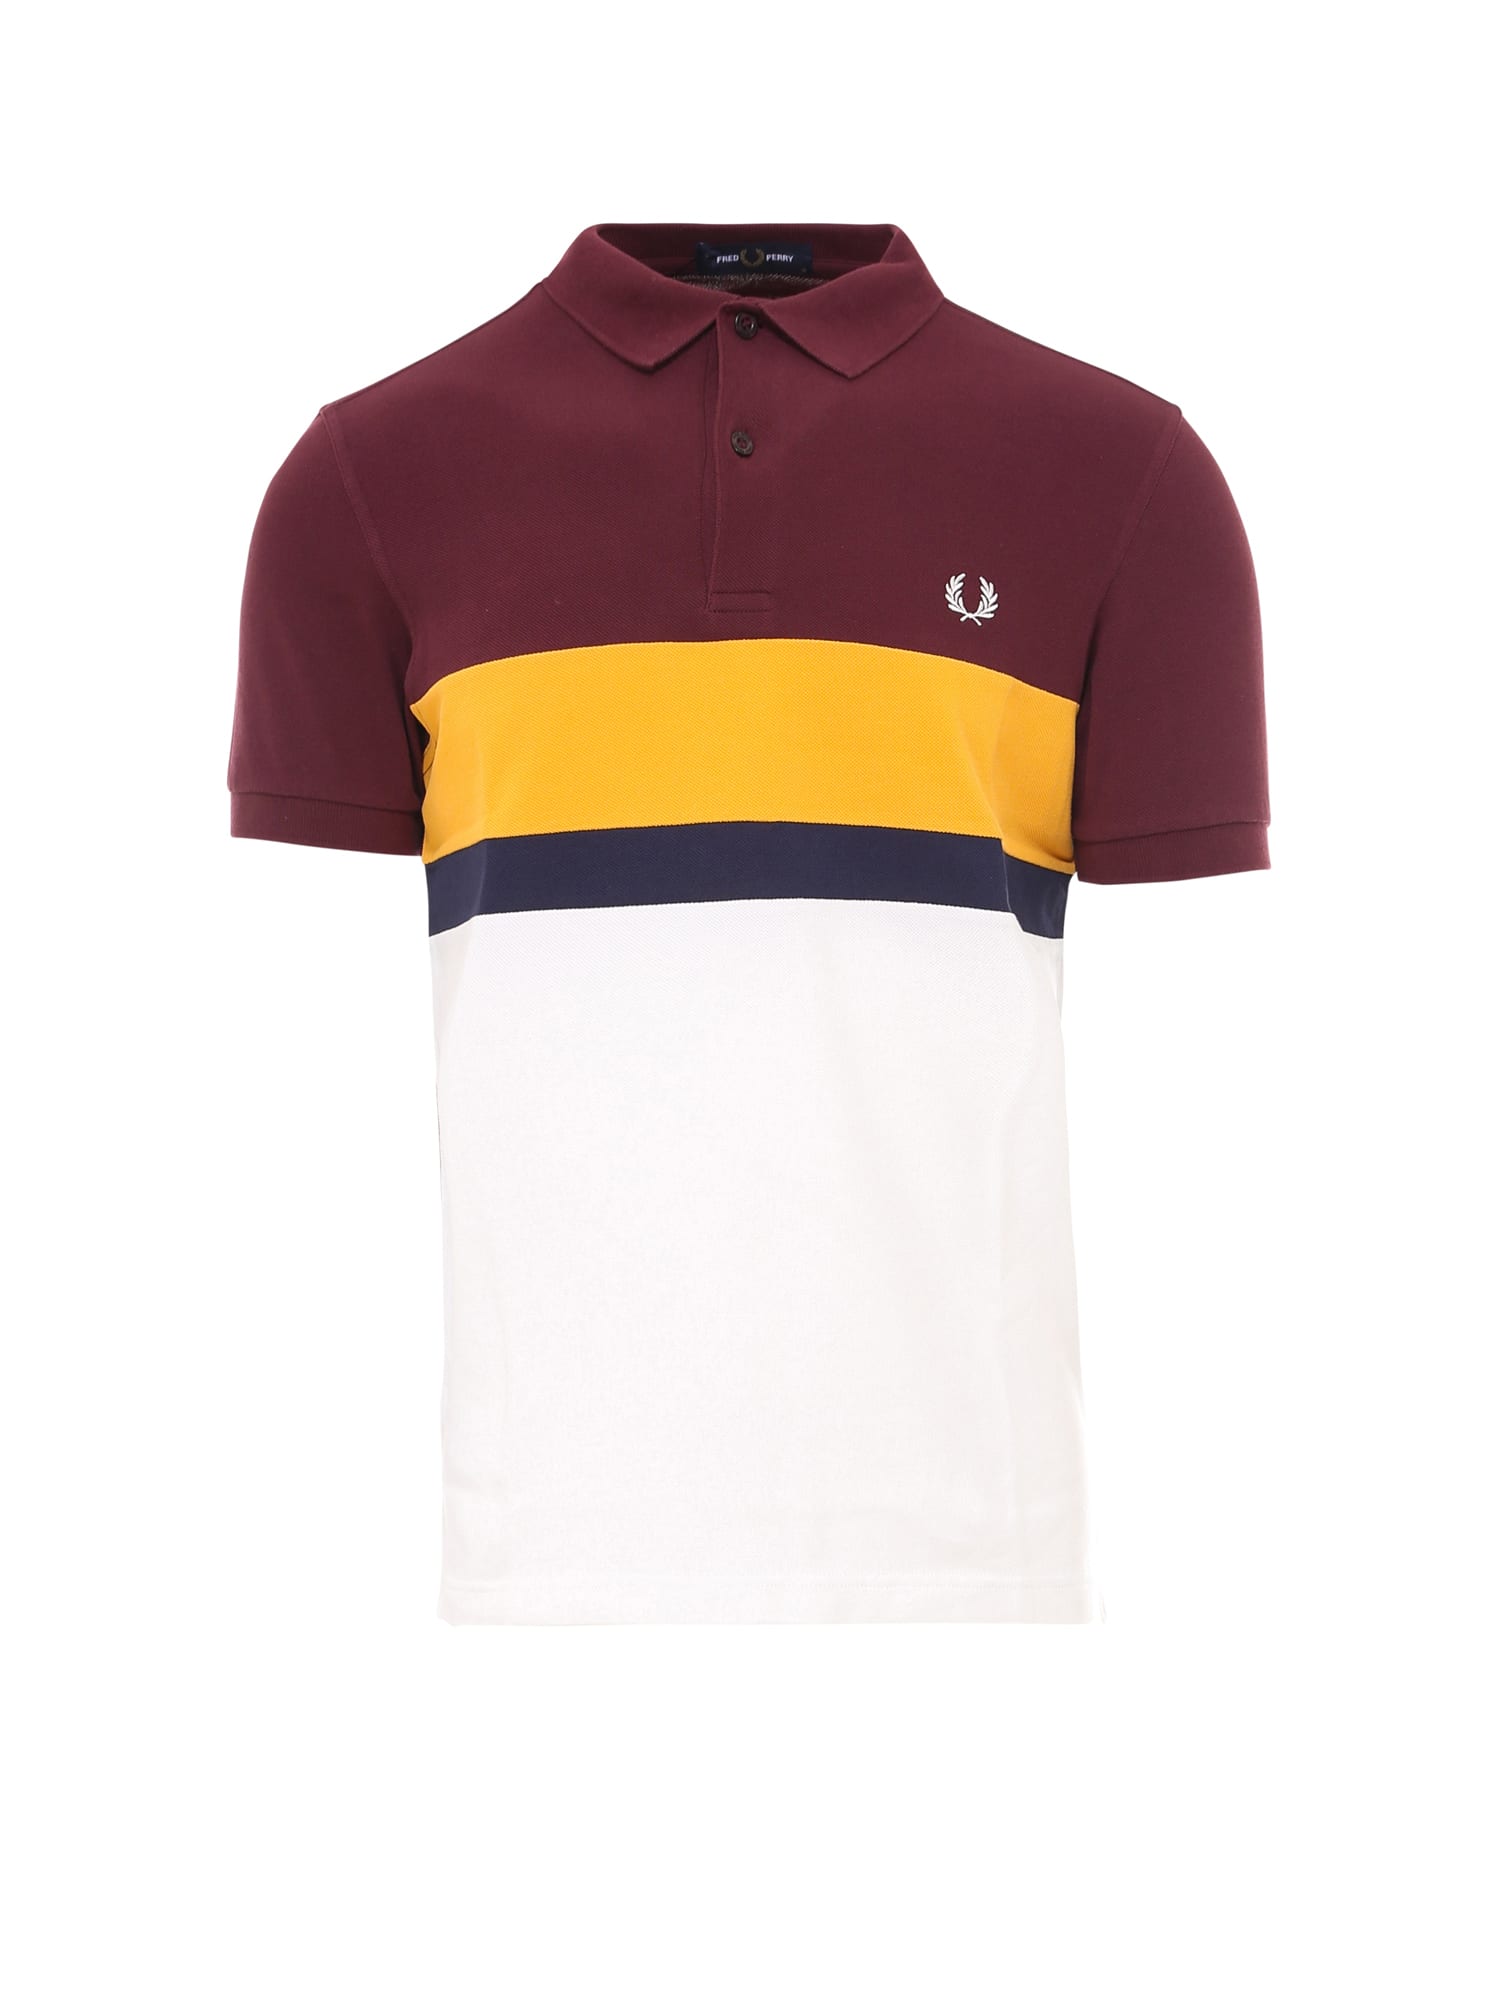 FRED PERRY POLO SHIRT,11517418